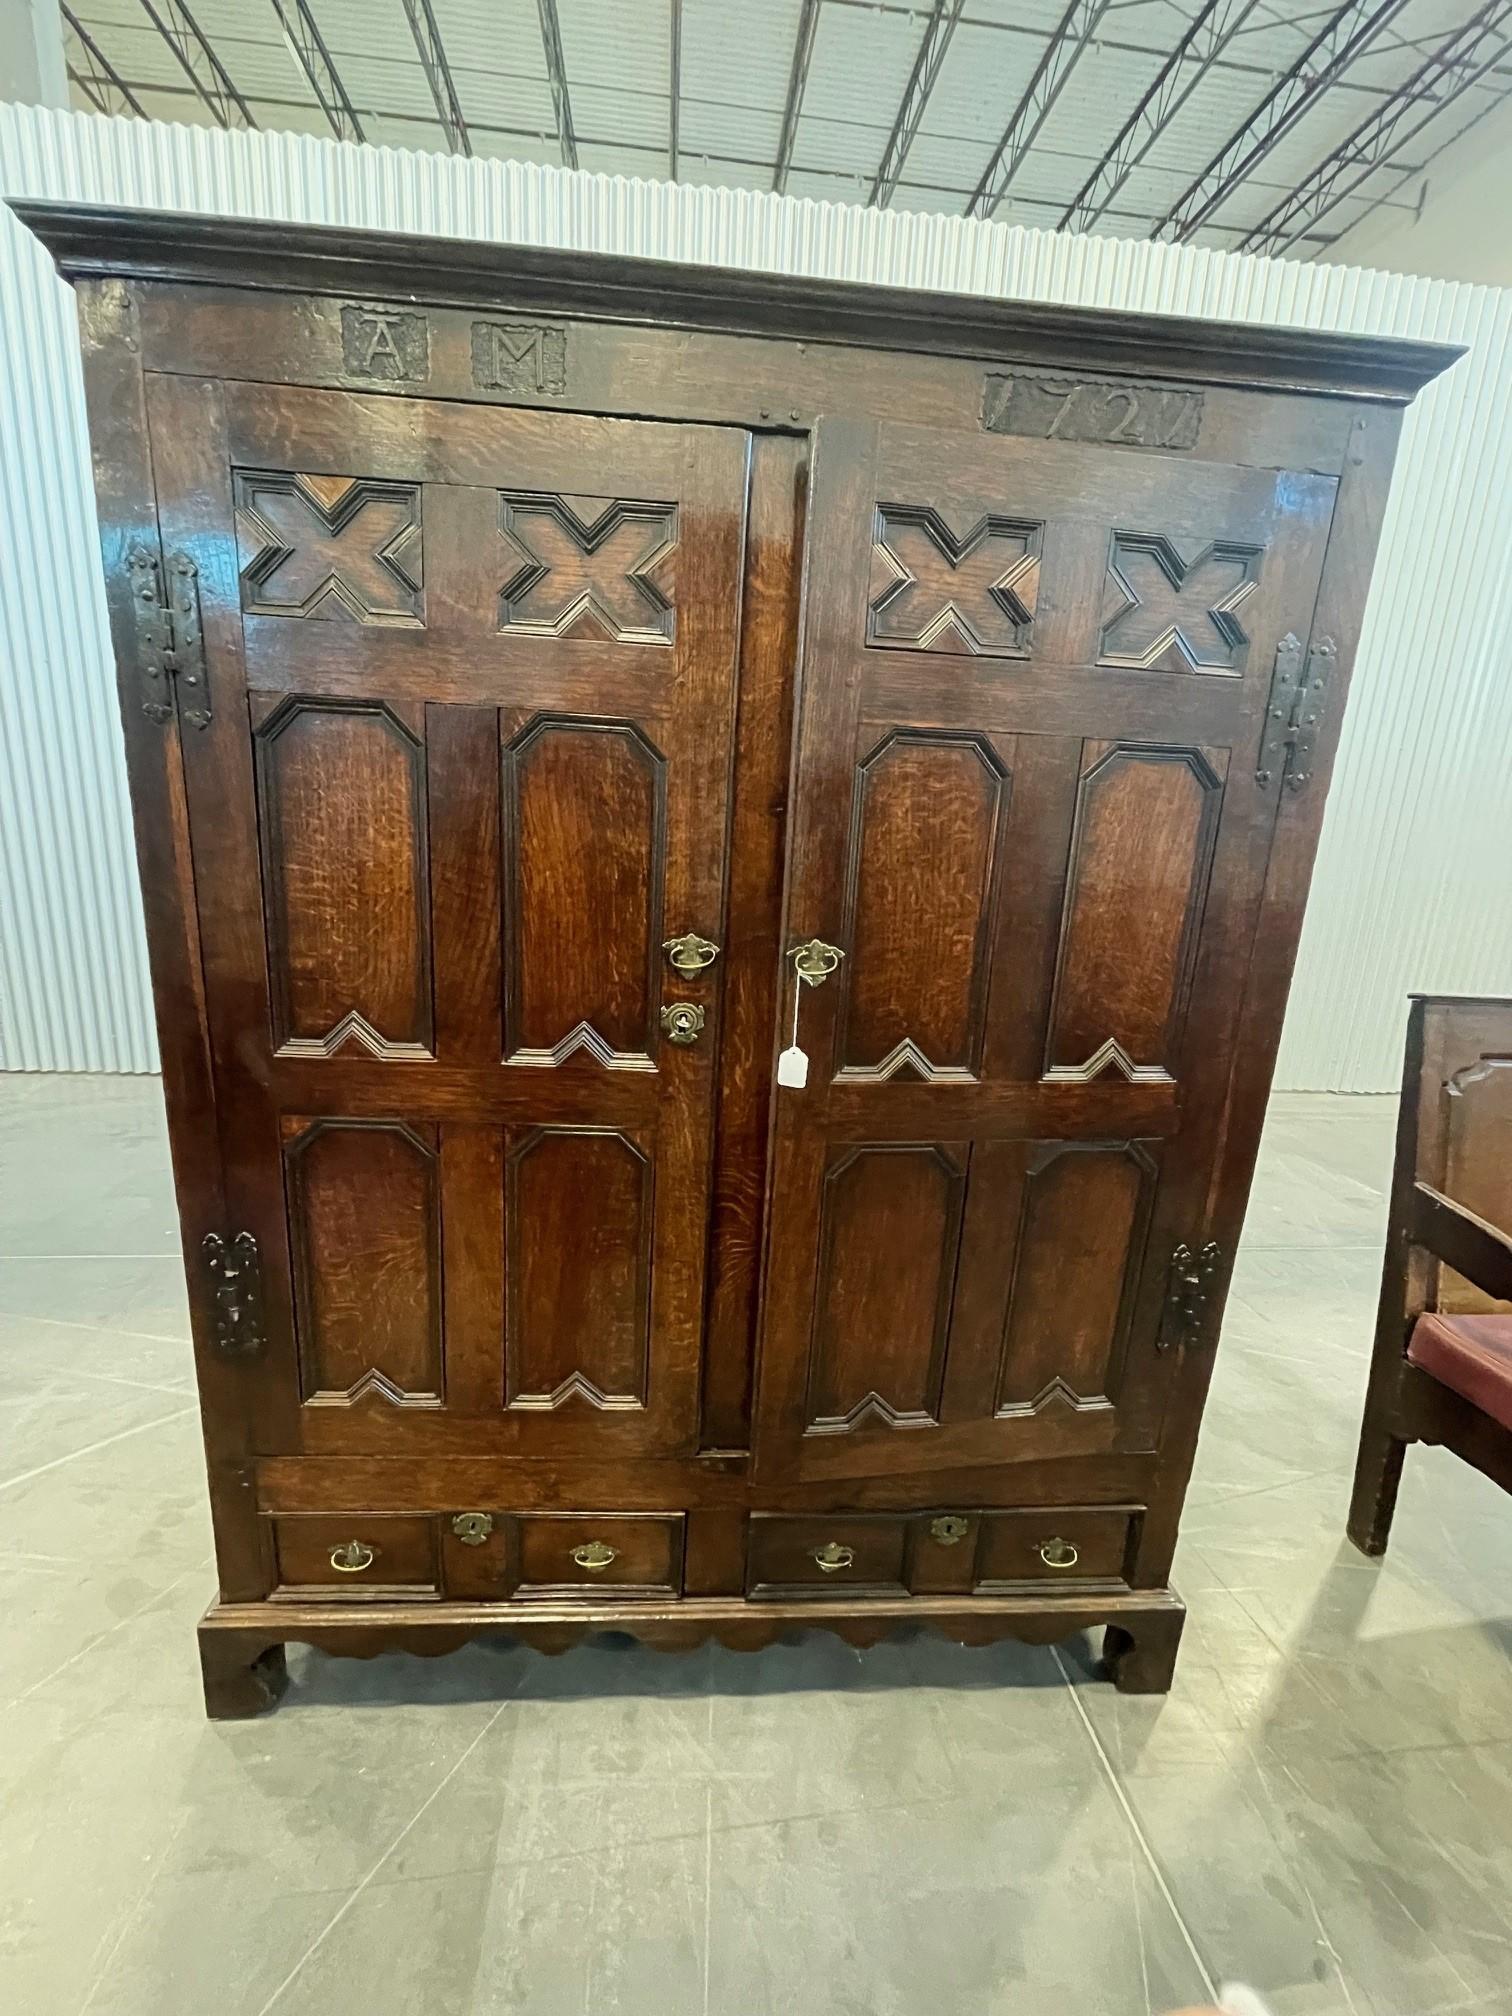 An Early 18th Century Oak Court Cupboard  
A lovely piece of Georgian furniture with exceptional coloring, the 
Initialed ‘AM’ and dated ‘1727’

Adams Antiques sold this item on 5th June 2011, £4,500.00 ($5,800.00)

Provenance: The Fulwood